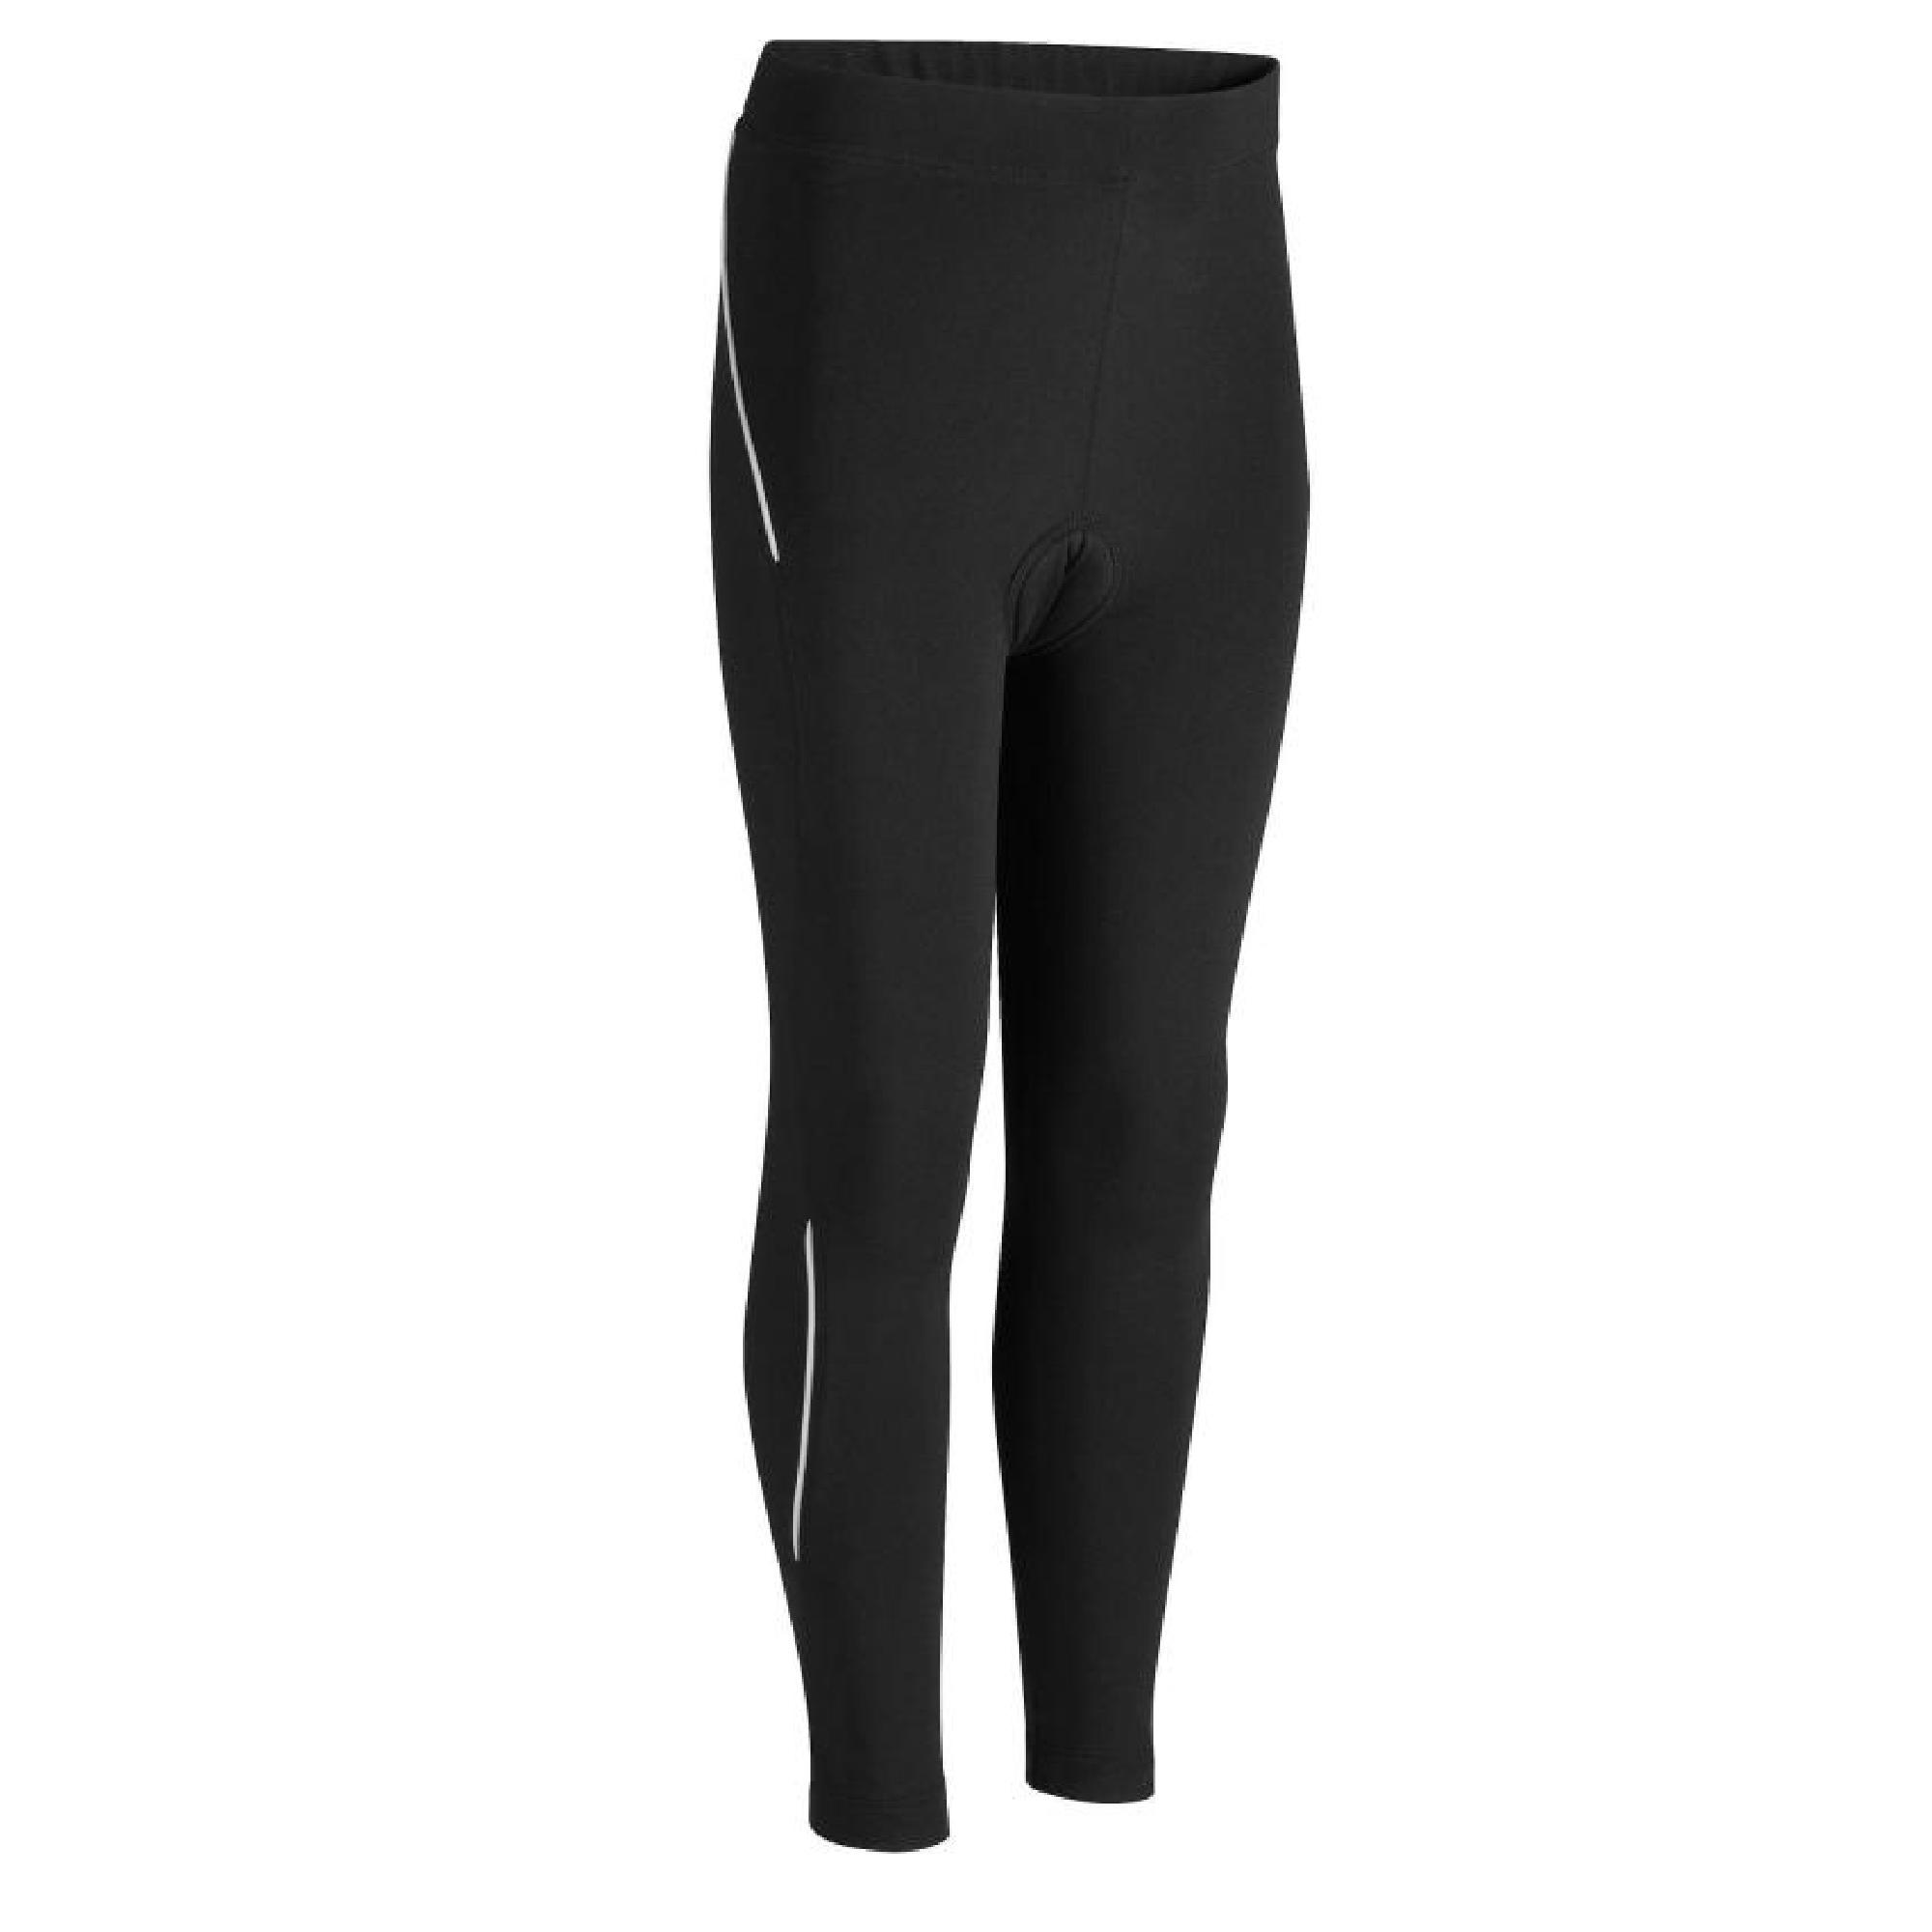 Fleece Lined Leggings Women Water Resistant Warm Running Pants Thermal Insulated  Hiking Leggings With Pockets Colanti